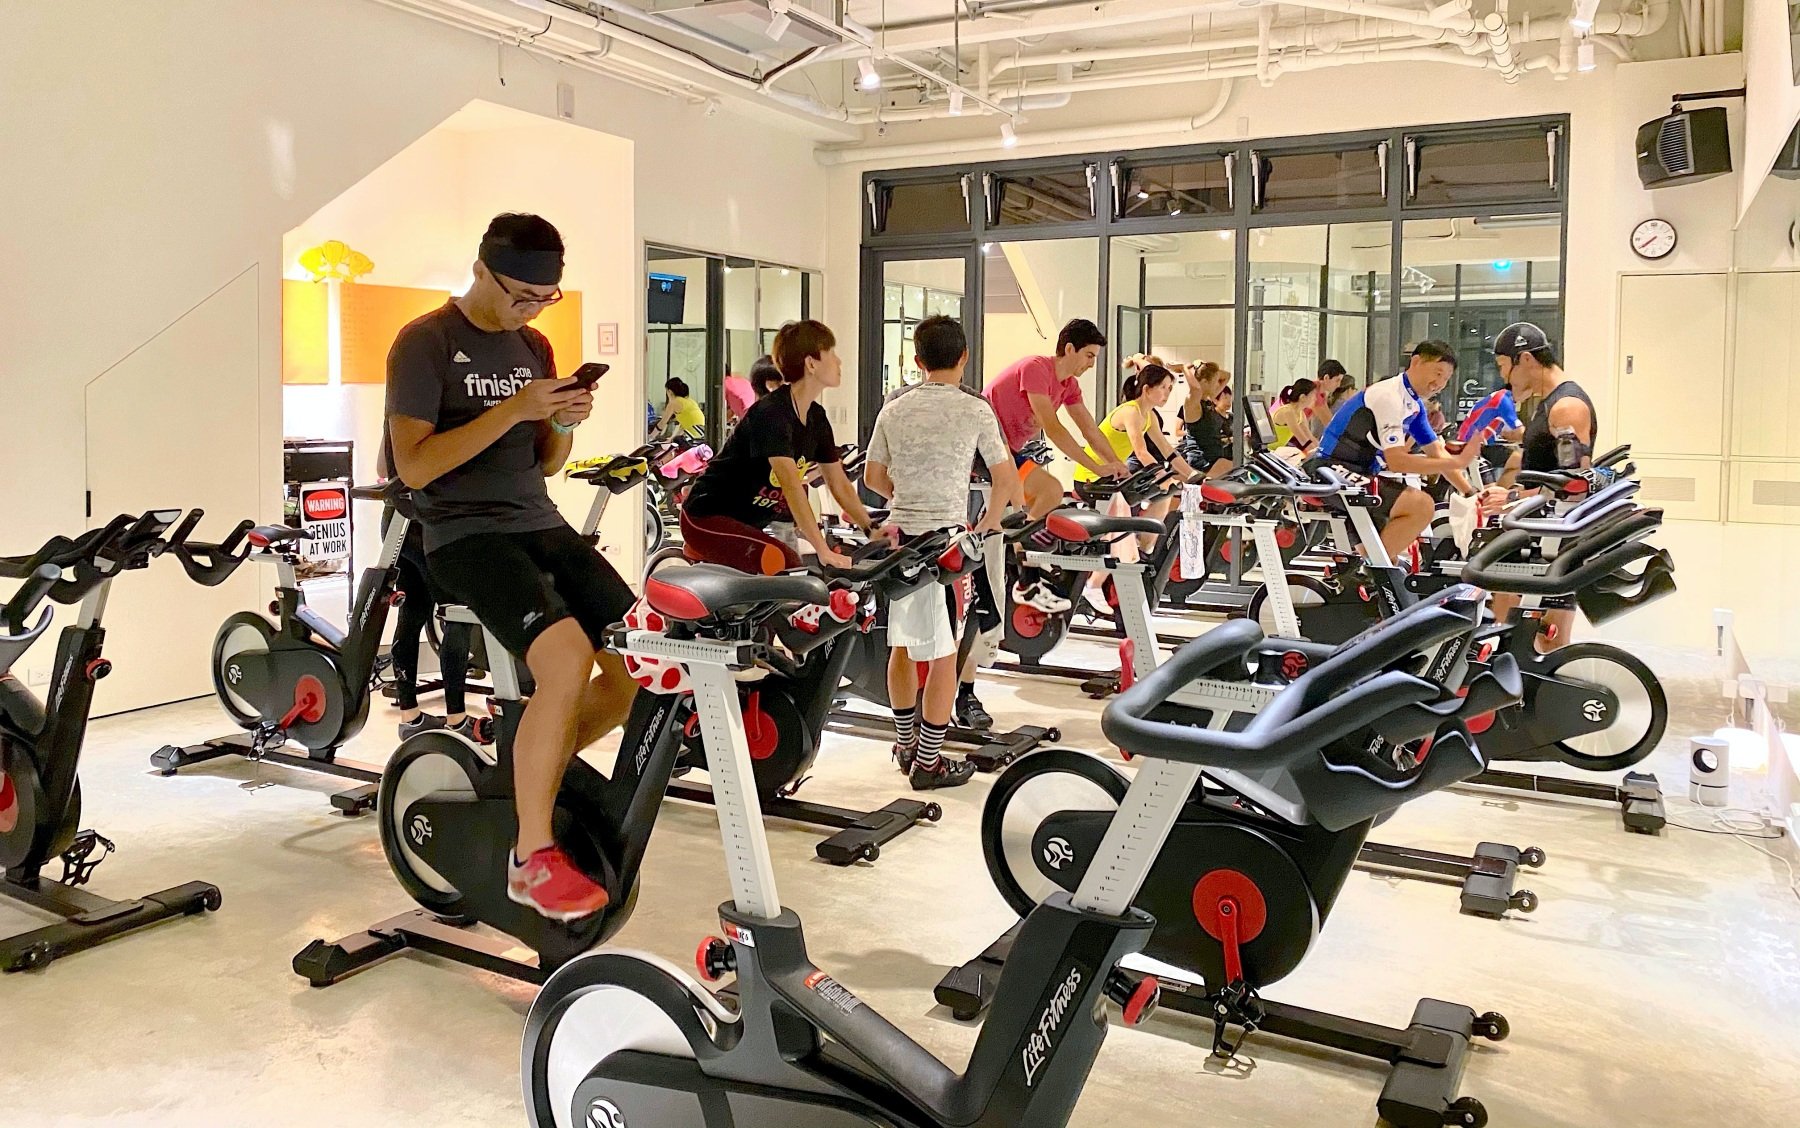 [Taipei Flywheel Course] Lose weight and develop peach buttocks! 5 Flywheel classrooms in Taipei organized